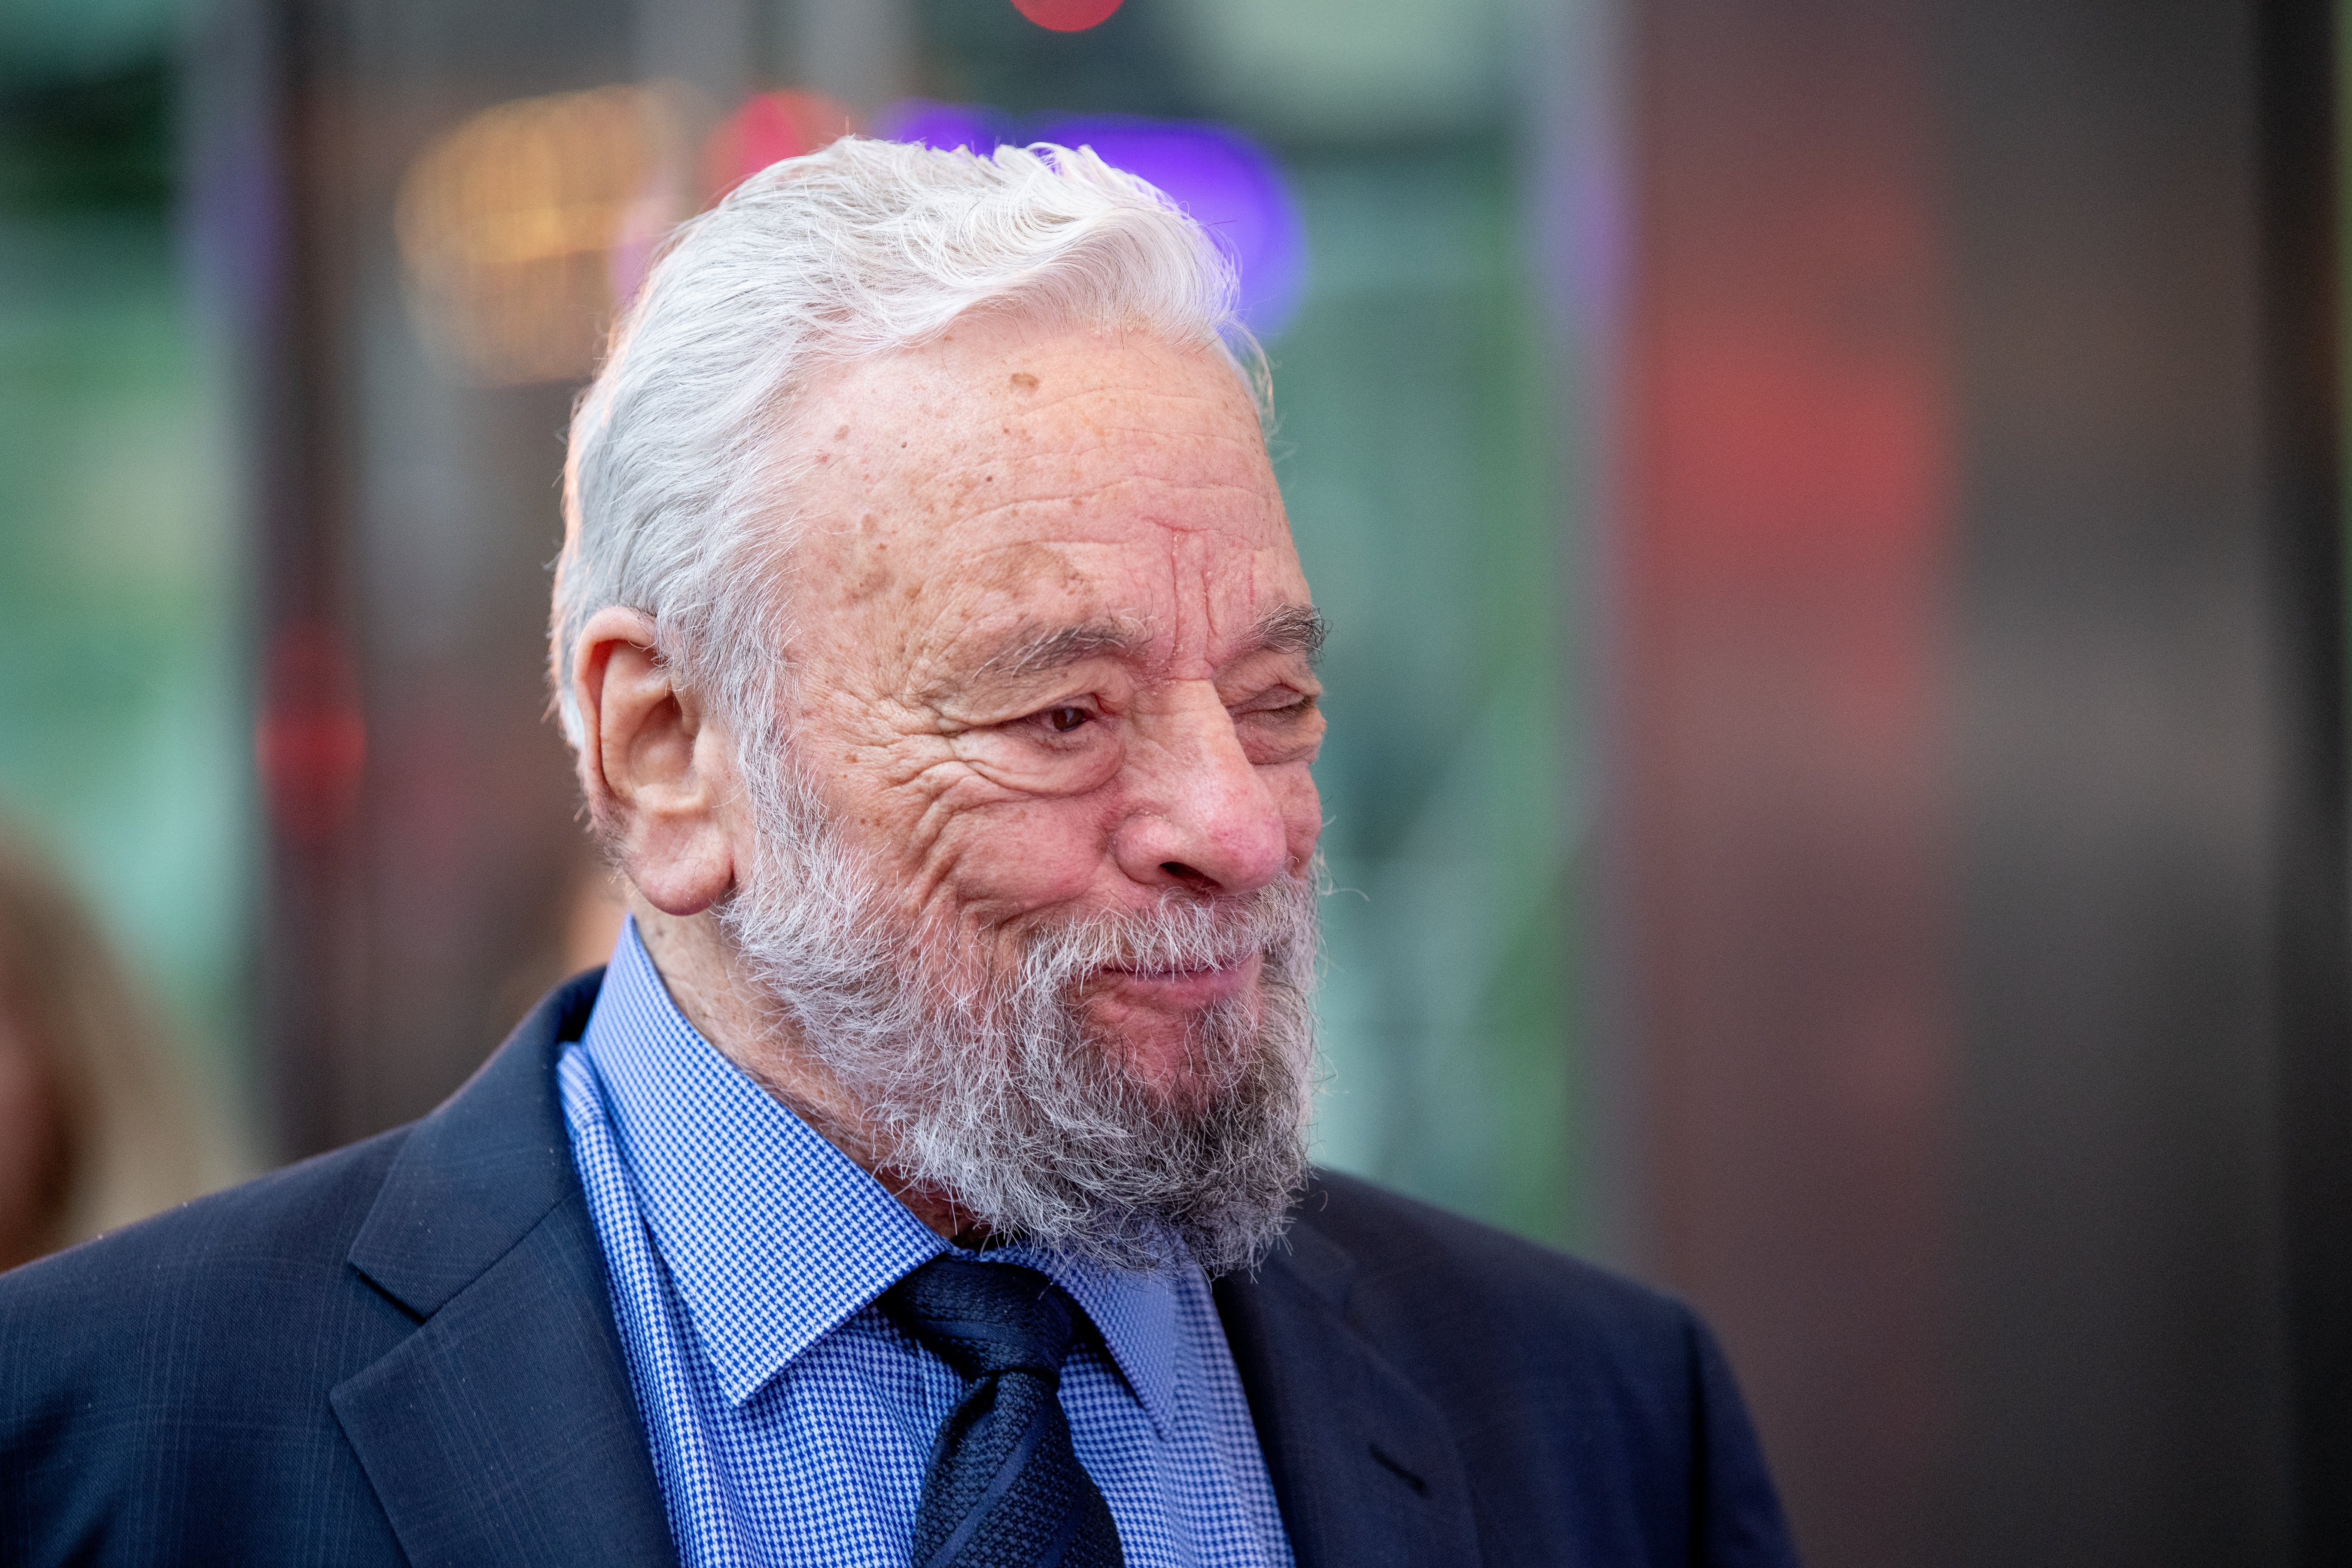 Stephen Sondheim attends the 2019 American Songbook Gala at Alice Tully Hall at Lincoln Center on June 19, 2019 in New York City.  |  Source: Getty Images